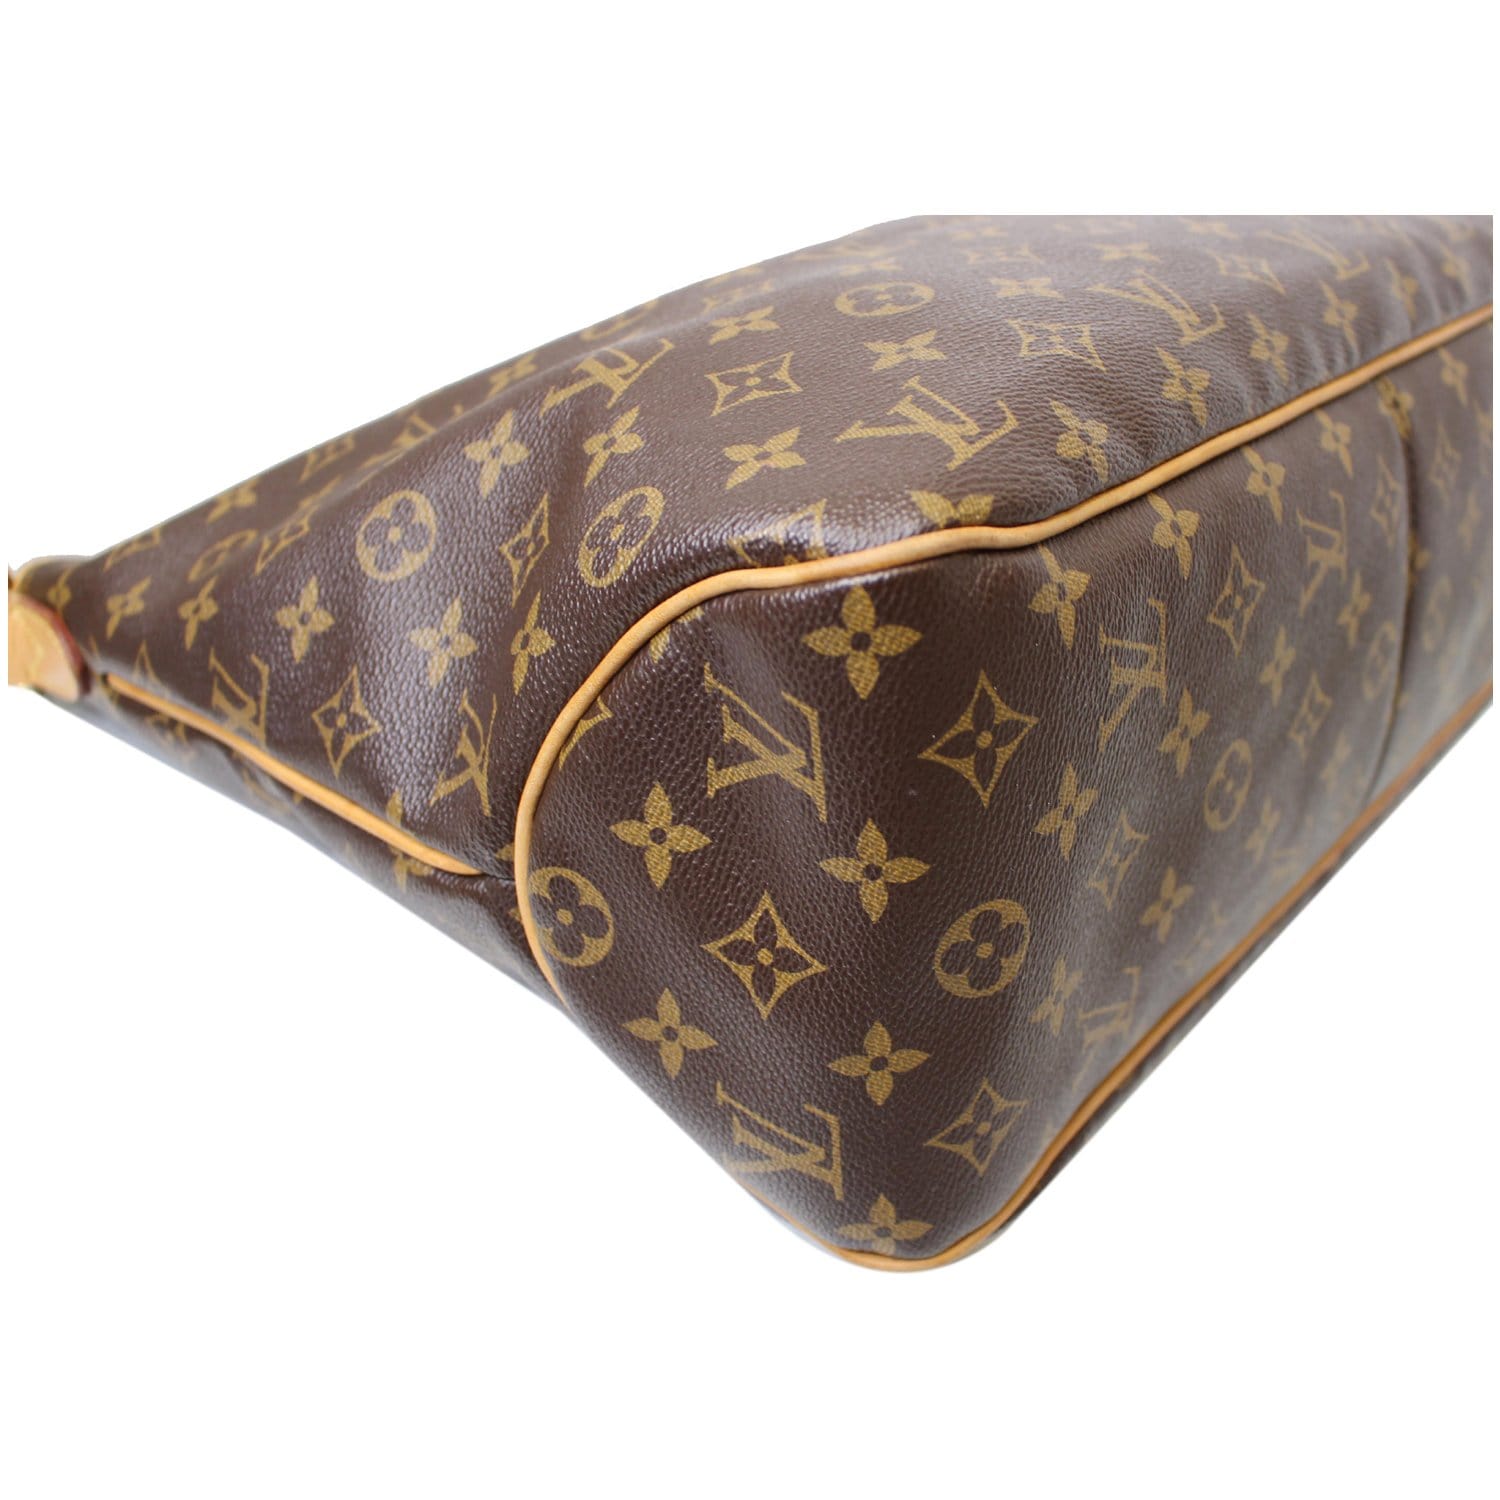 Louis Vuitton Monogram Canvas Delightful MM Bag For Sale at 1stDibs